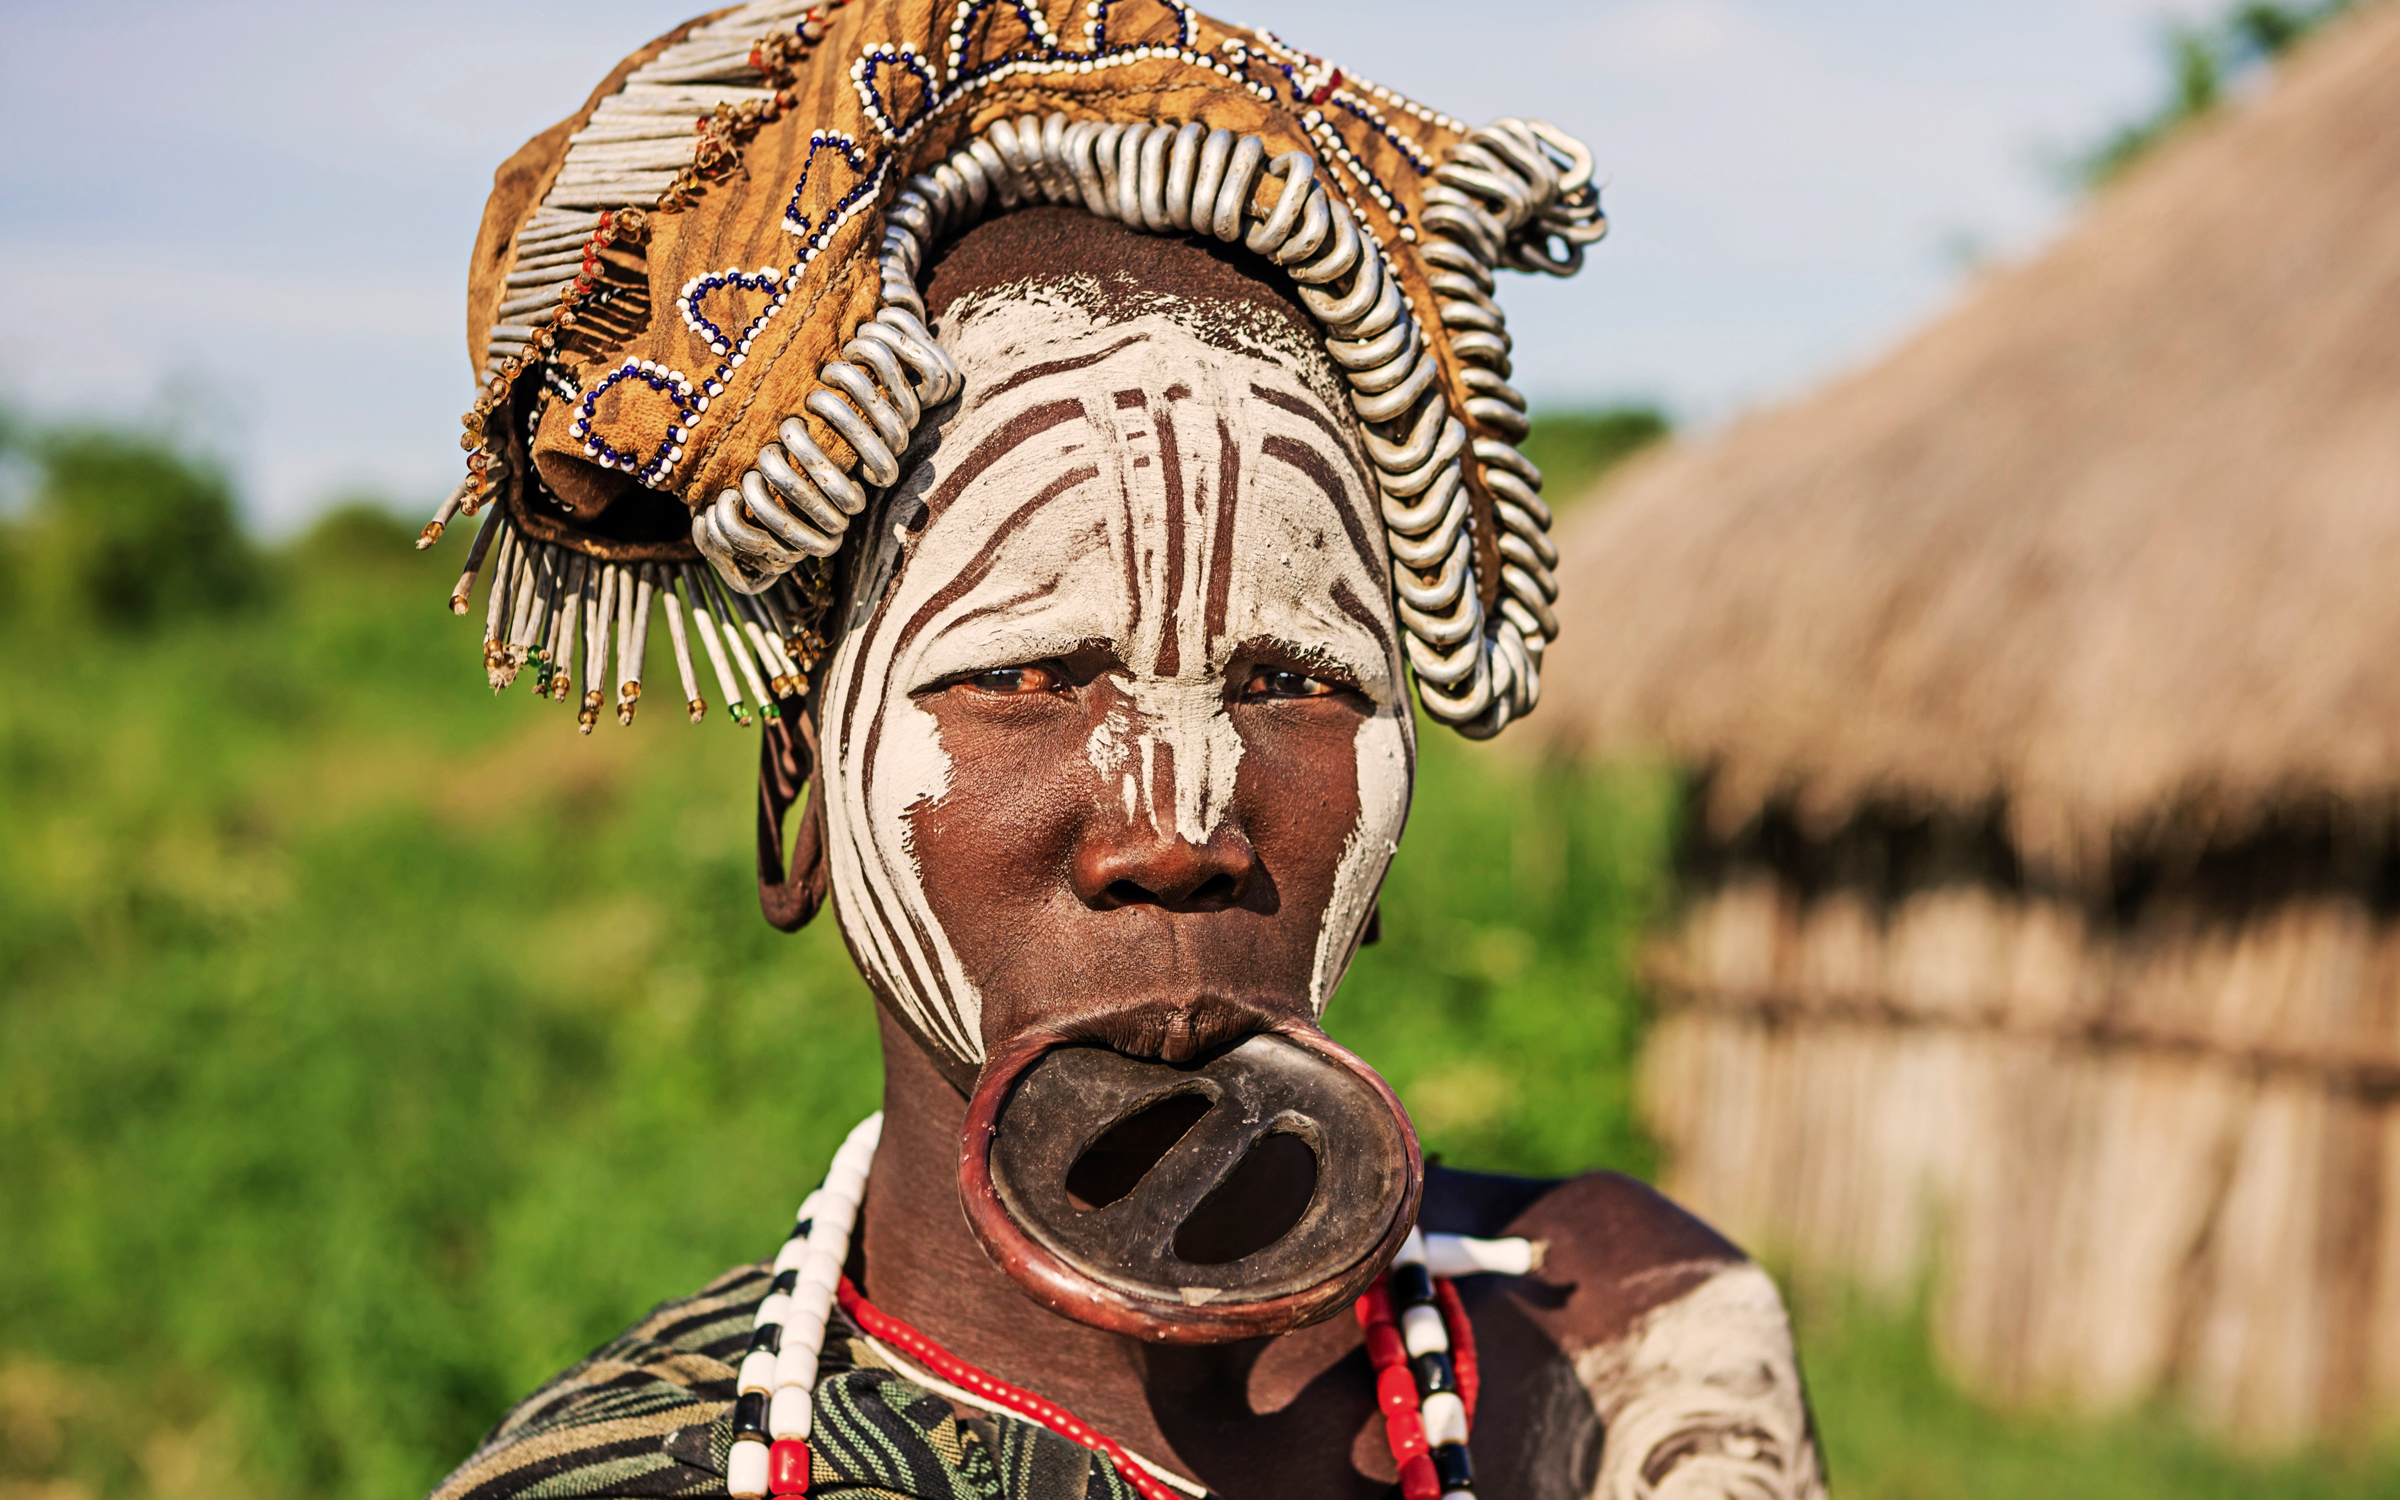 Mursi woman with lip plate - Southern Tribes and Trails of Ethiopia